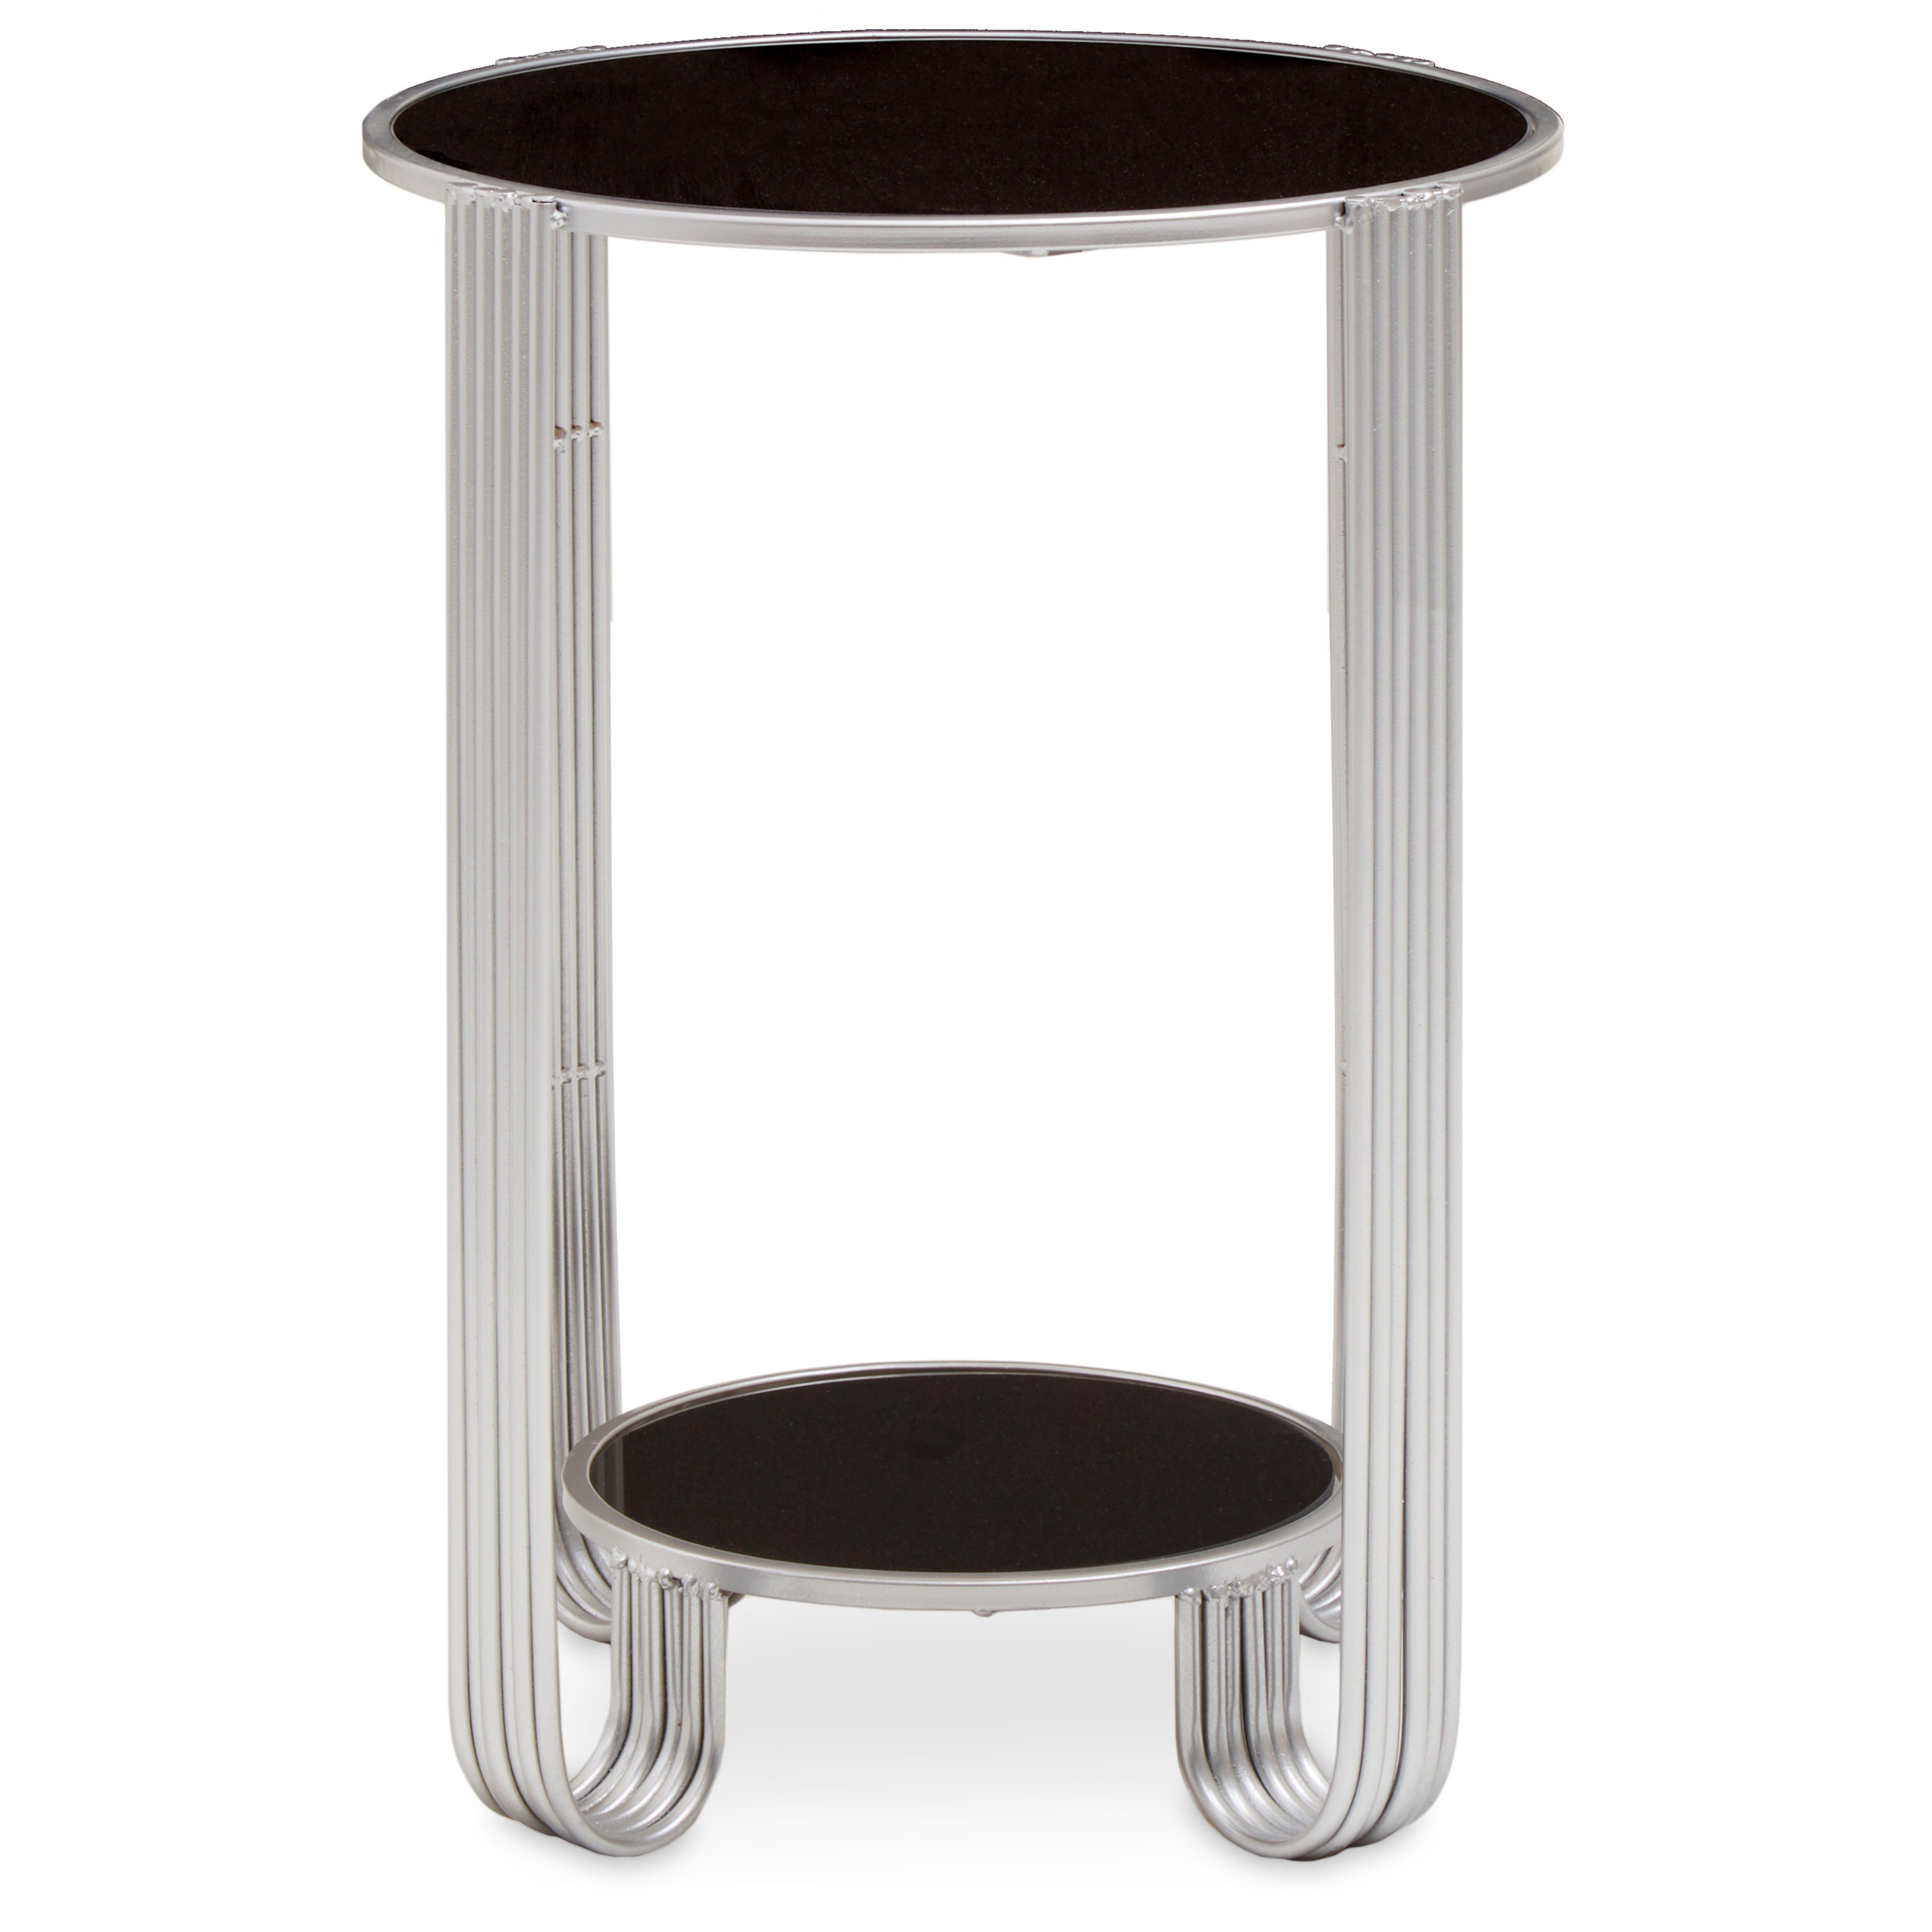 Jolie Round Mirror End Table - image 1